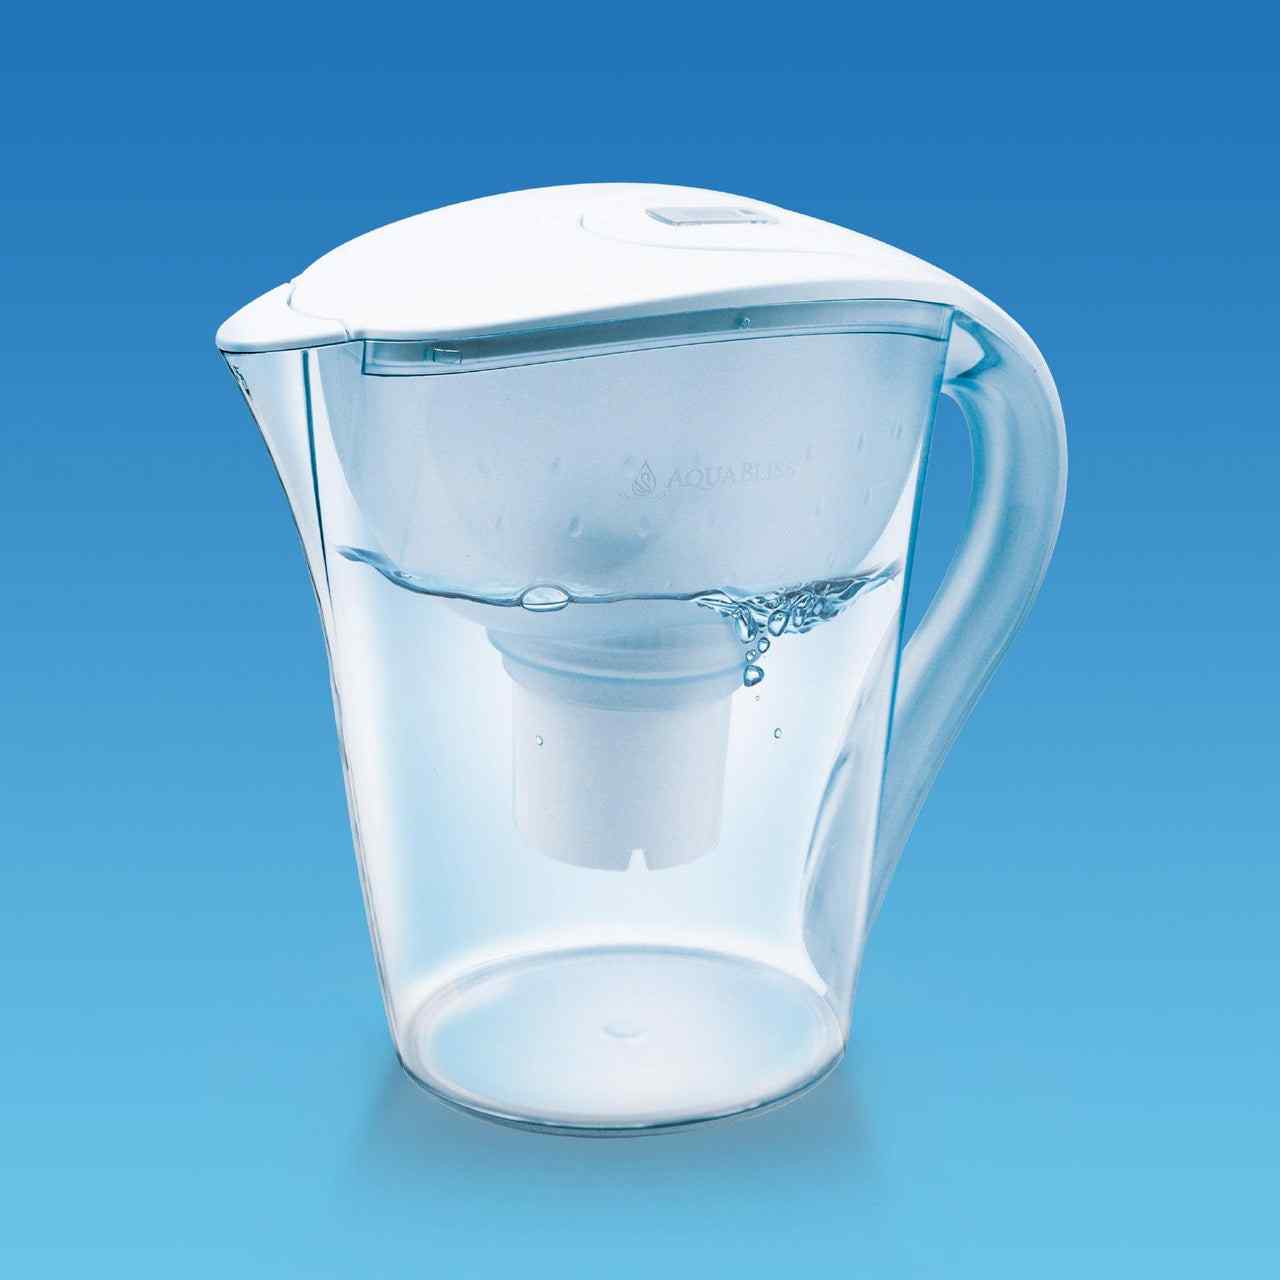 10-Cup Water Filter Pitcher - White (FWP1)